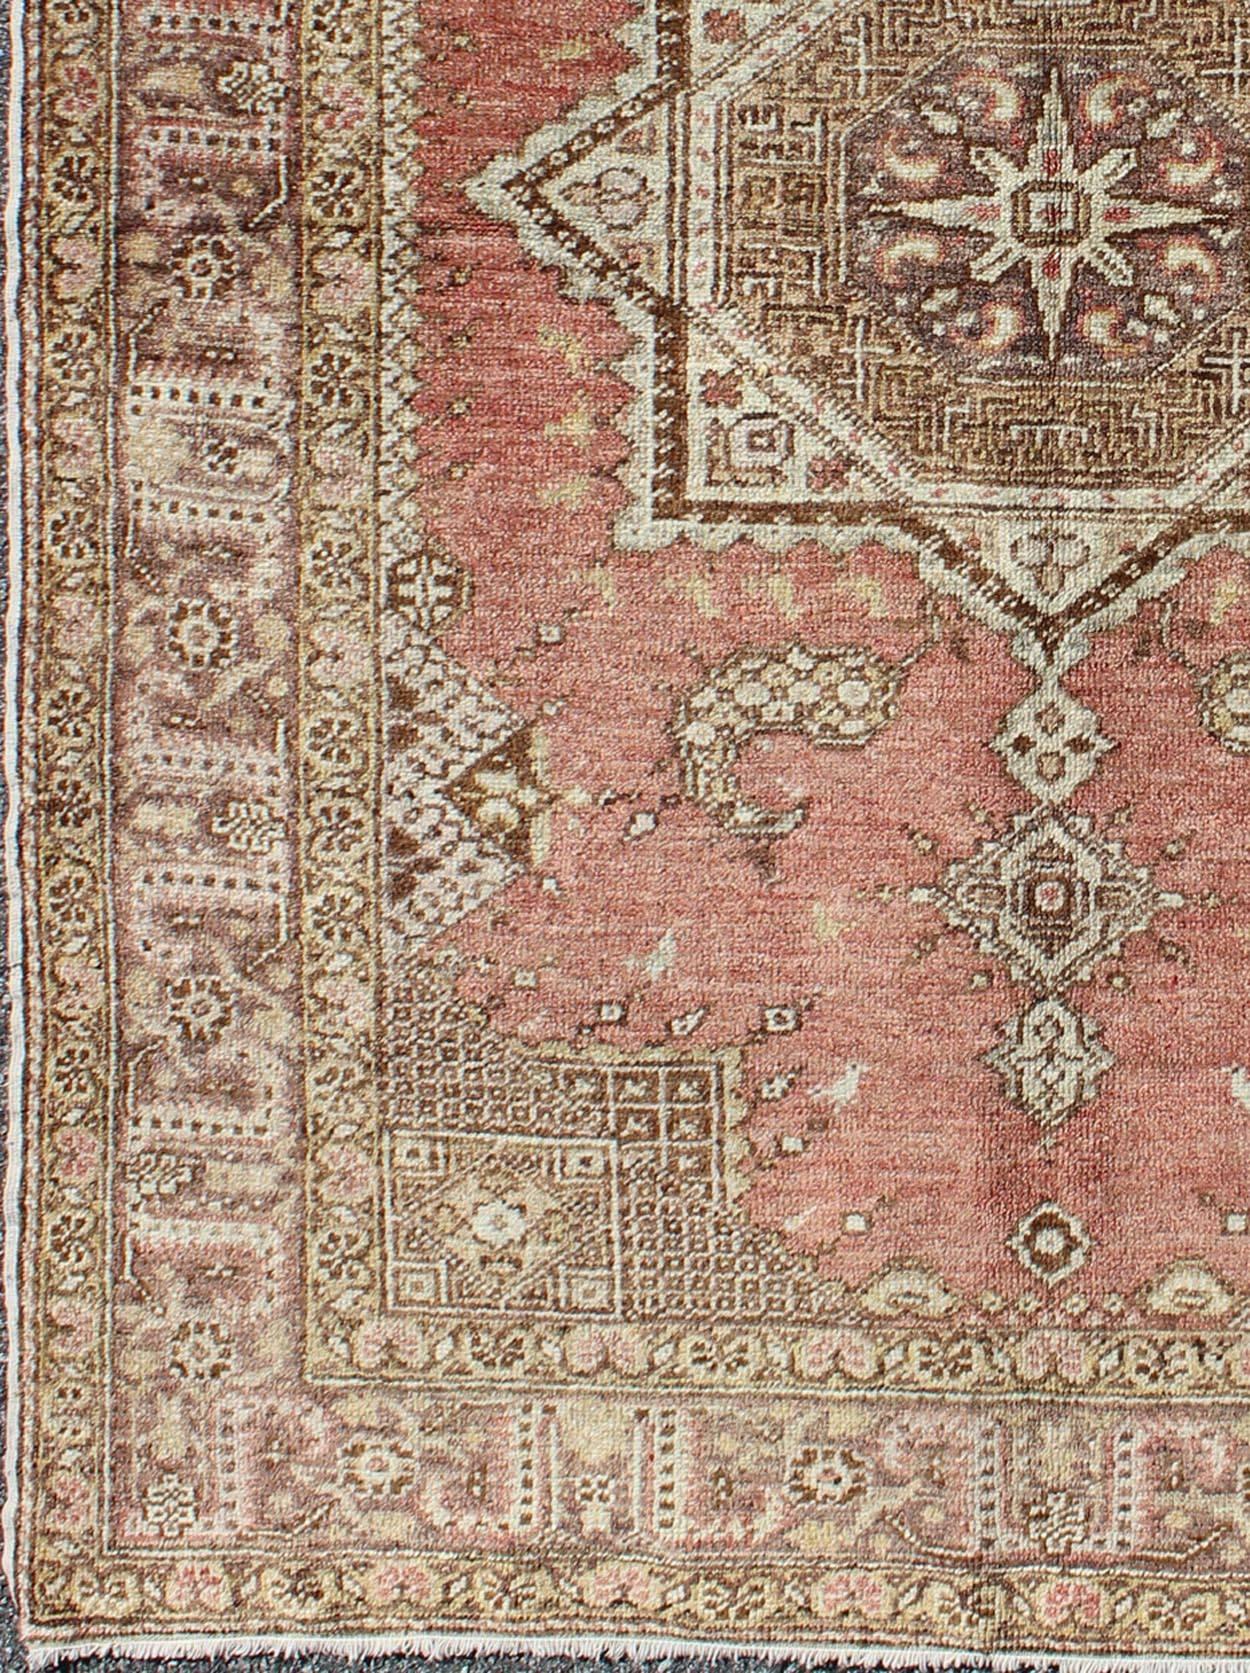 Vintage Turkish Oushak rug with geometric star medallion in red, ivory and taupe, Keivan Woven Arts / rug na-41641, country of origin / type: Turkey / Oushak, circa mid-20th century

This vintage Turkish Oushak carpet (circa mid-20th century)